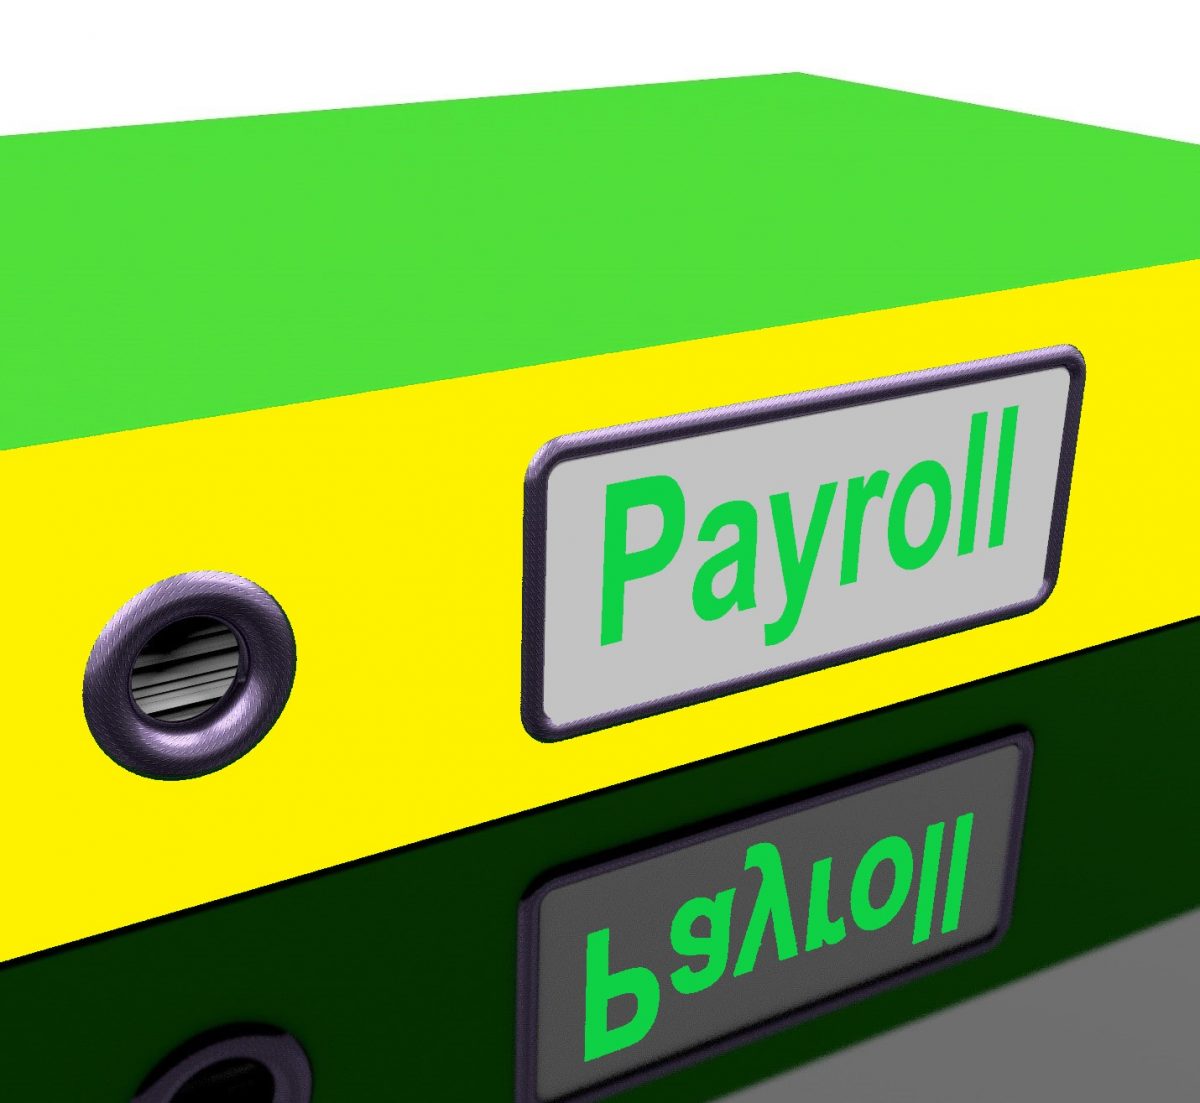 Outsourcing Payroll Services